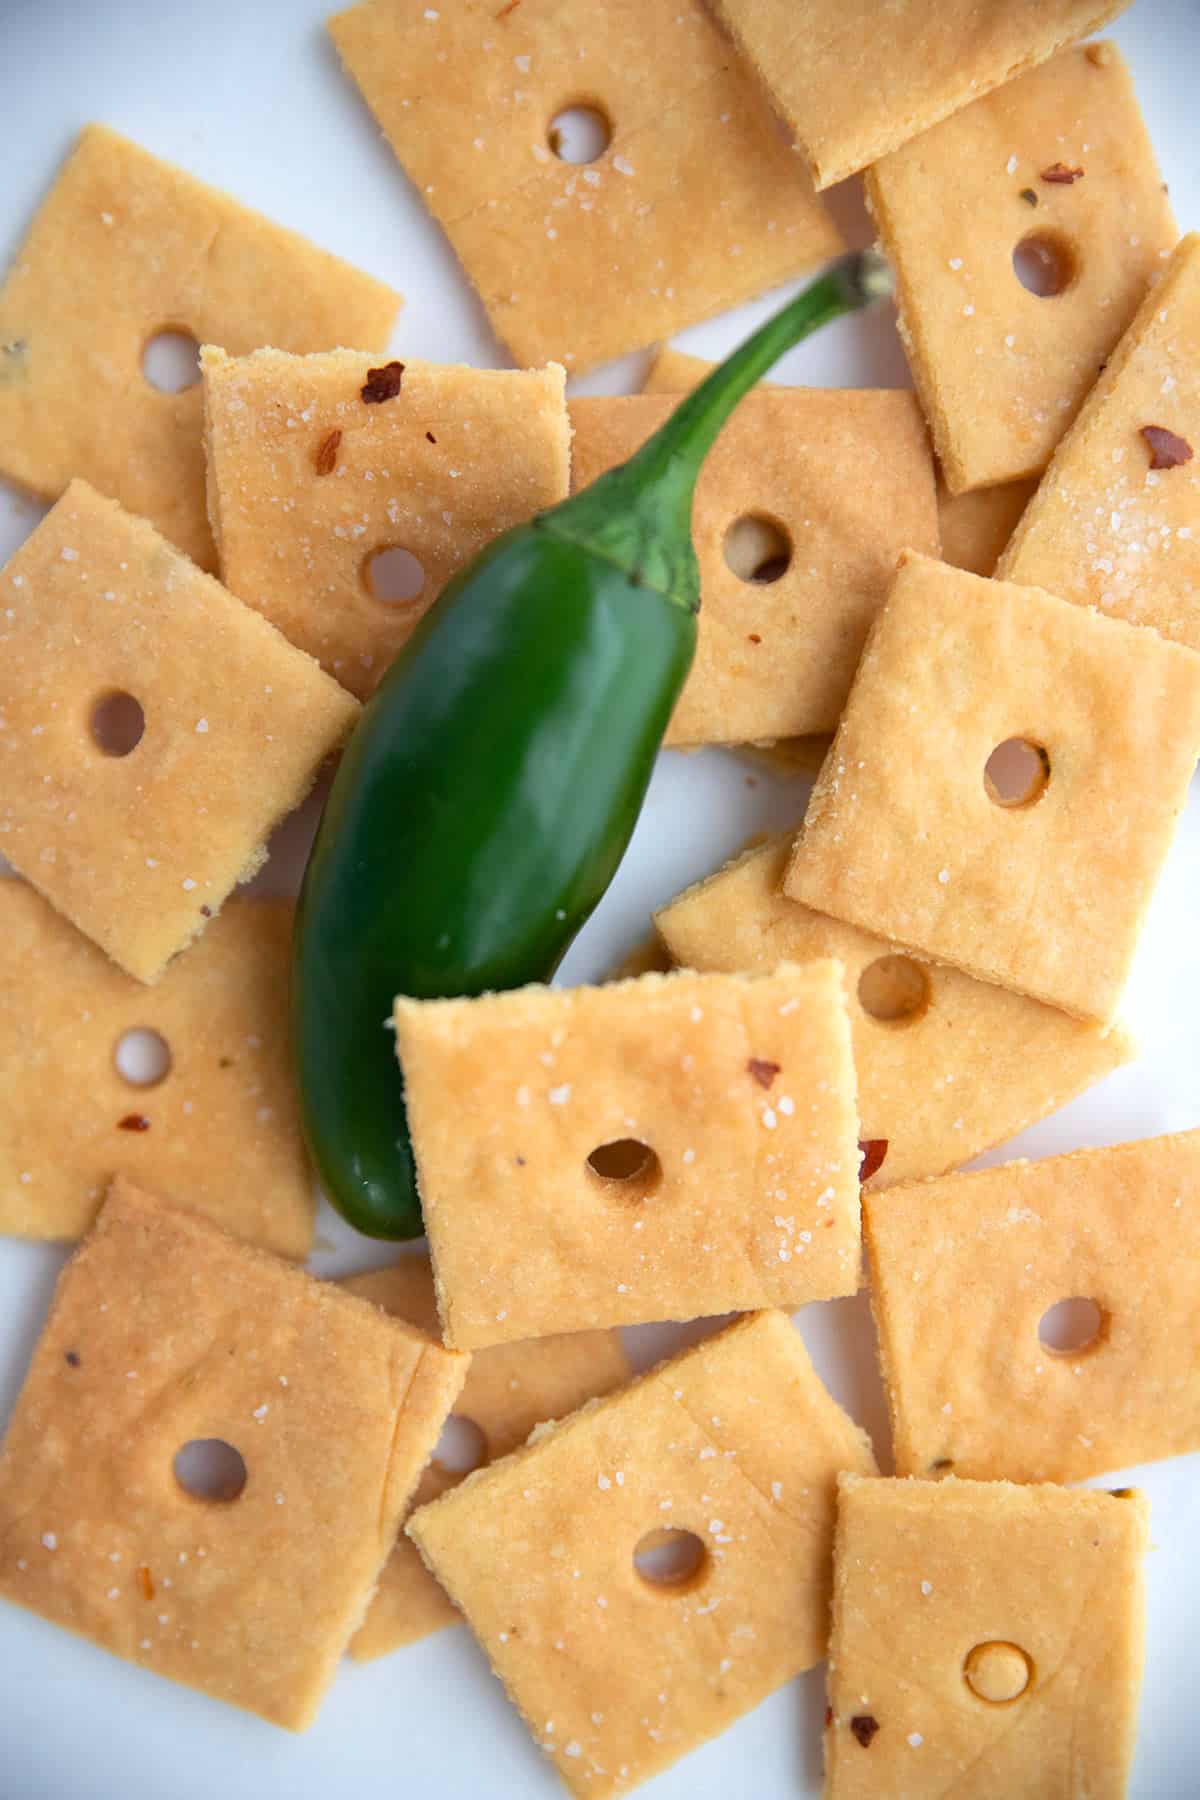 Top down image of a pile of keto cheese crackers with a jalapeno.